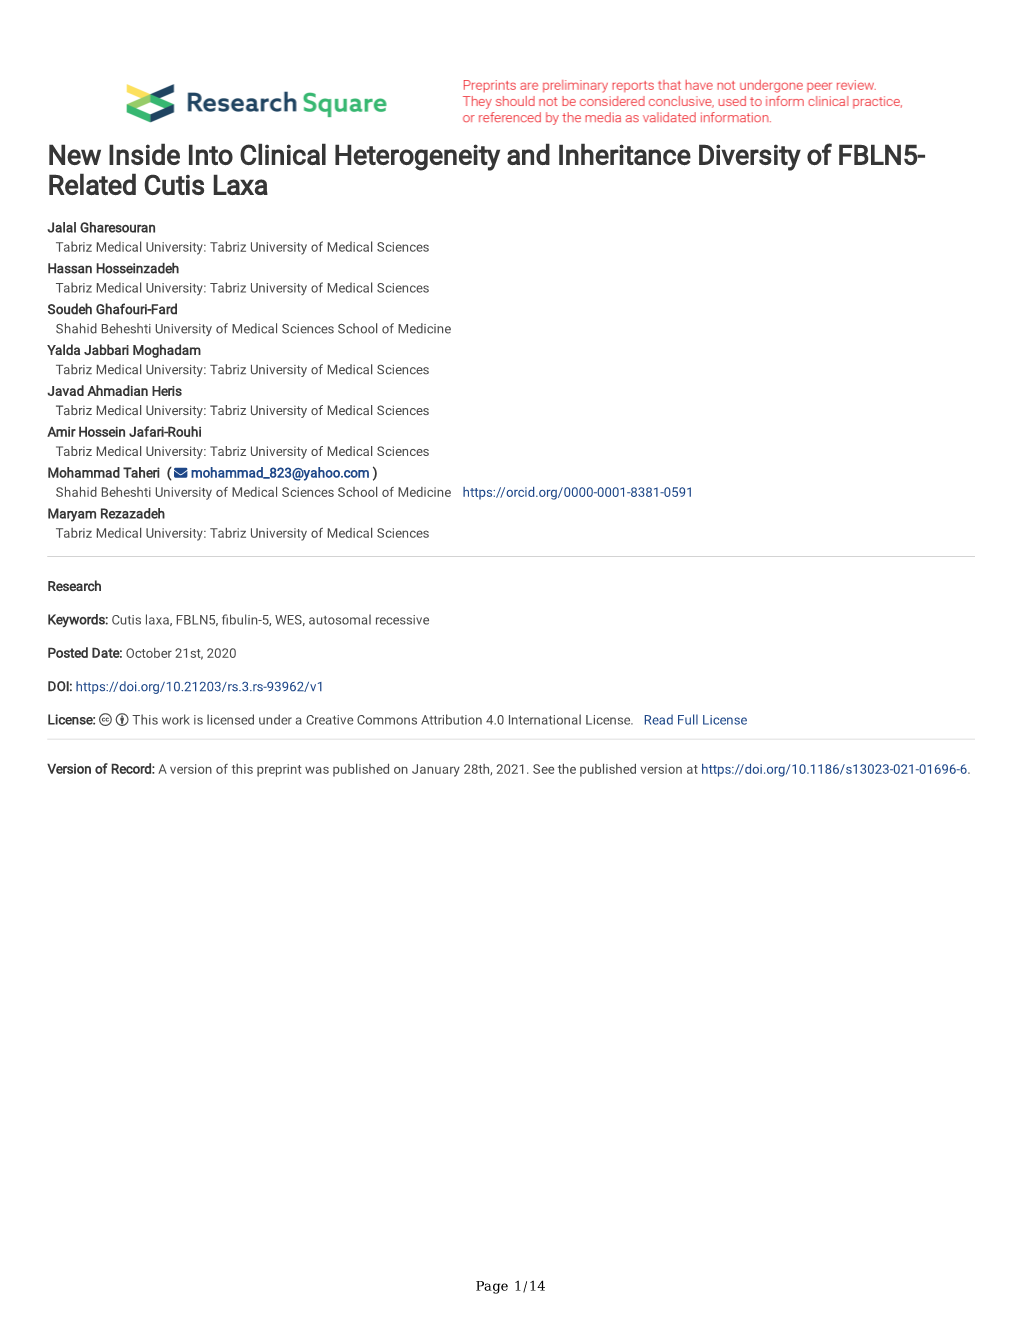 New Inside Into Clinical Heterogeneity and Inheritance Diversity of FBLN5- Related Cutis Laxa